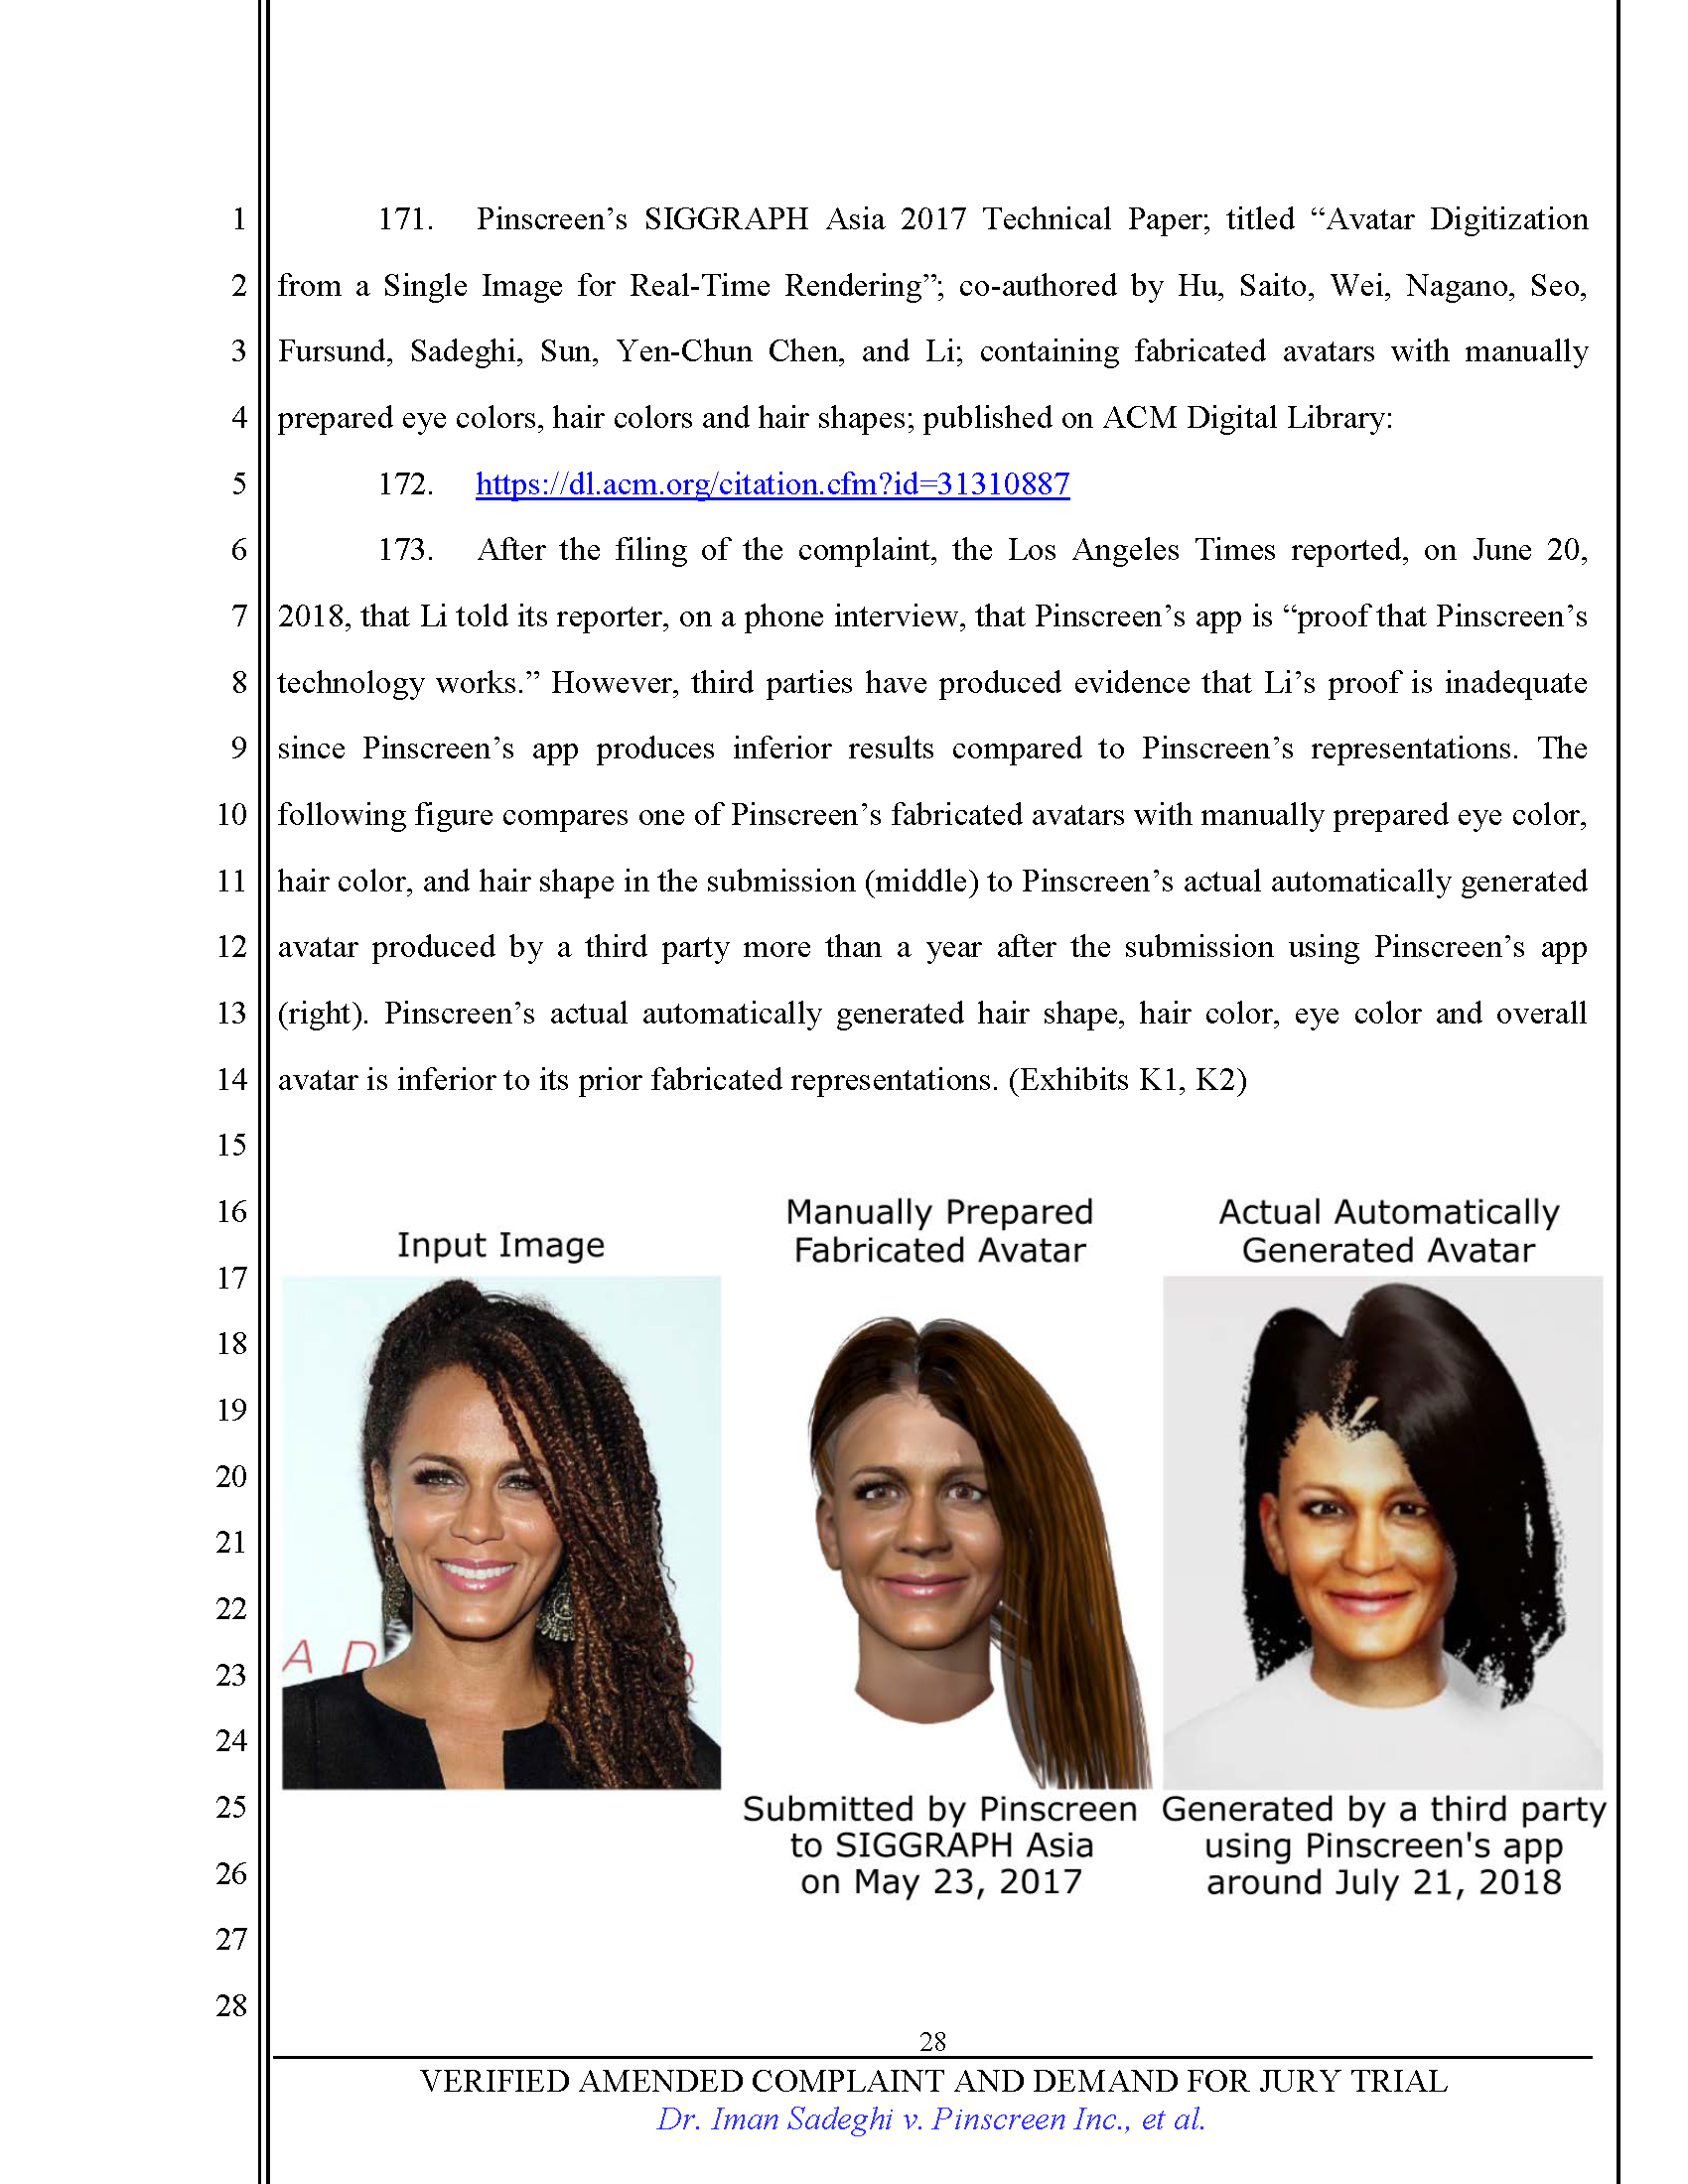 First Amended Complaint (FAC) Page 28